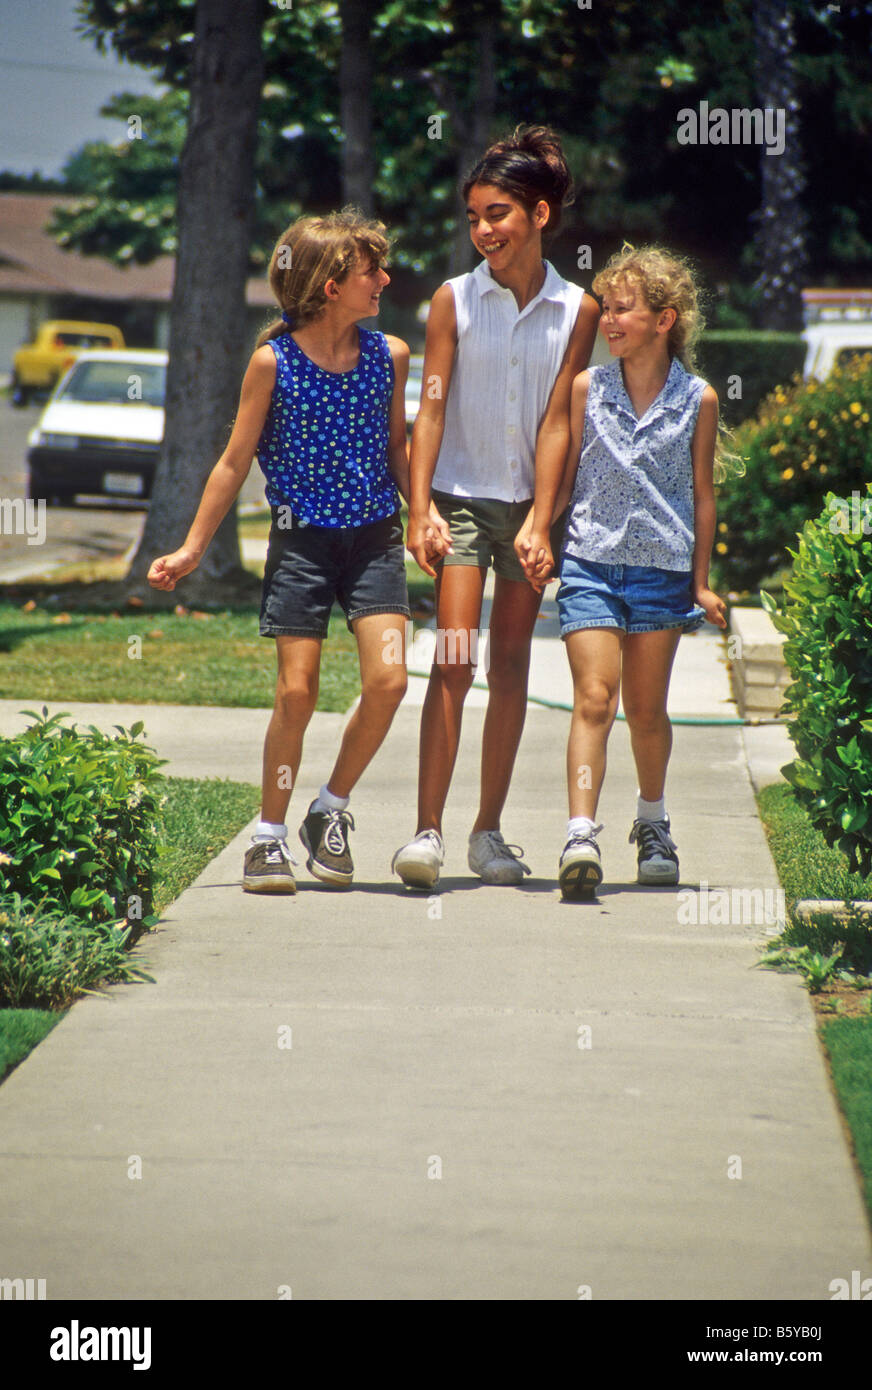 Three young girls walk down the sidewalk during summertime. Stock Photo